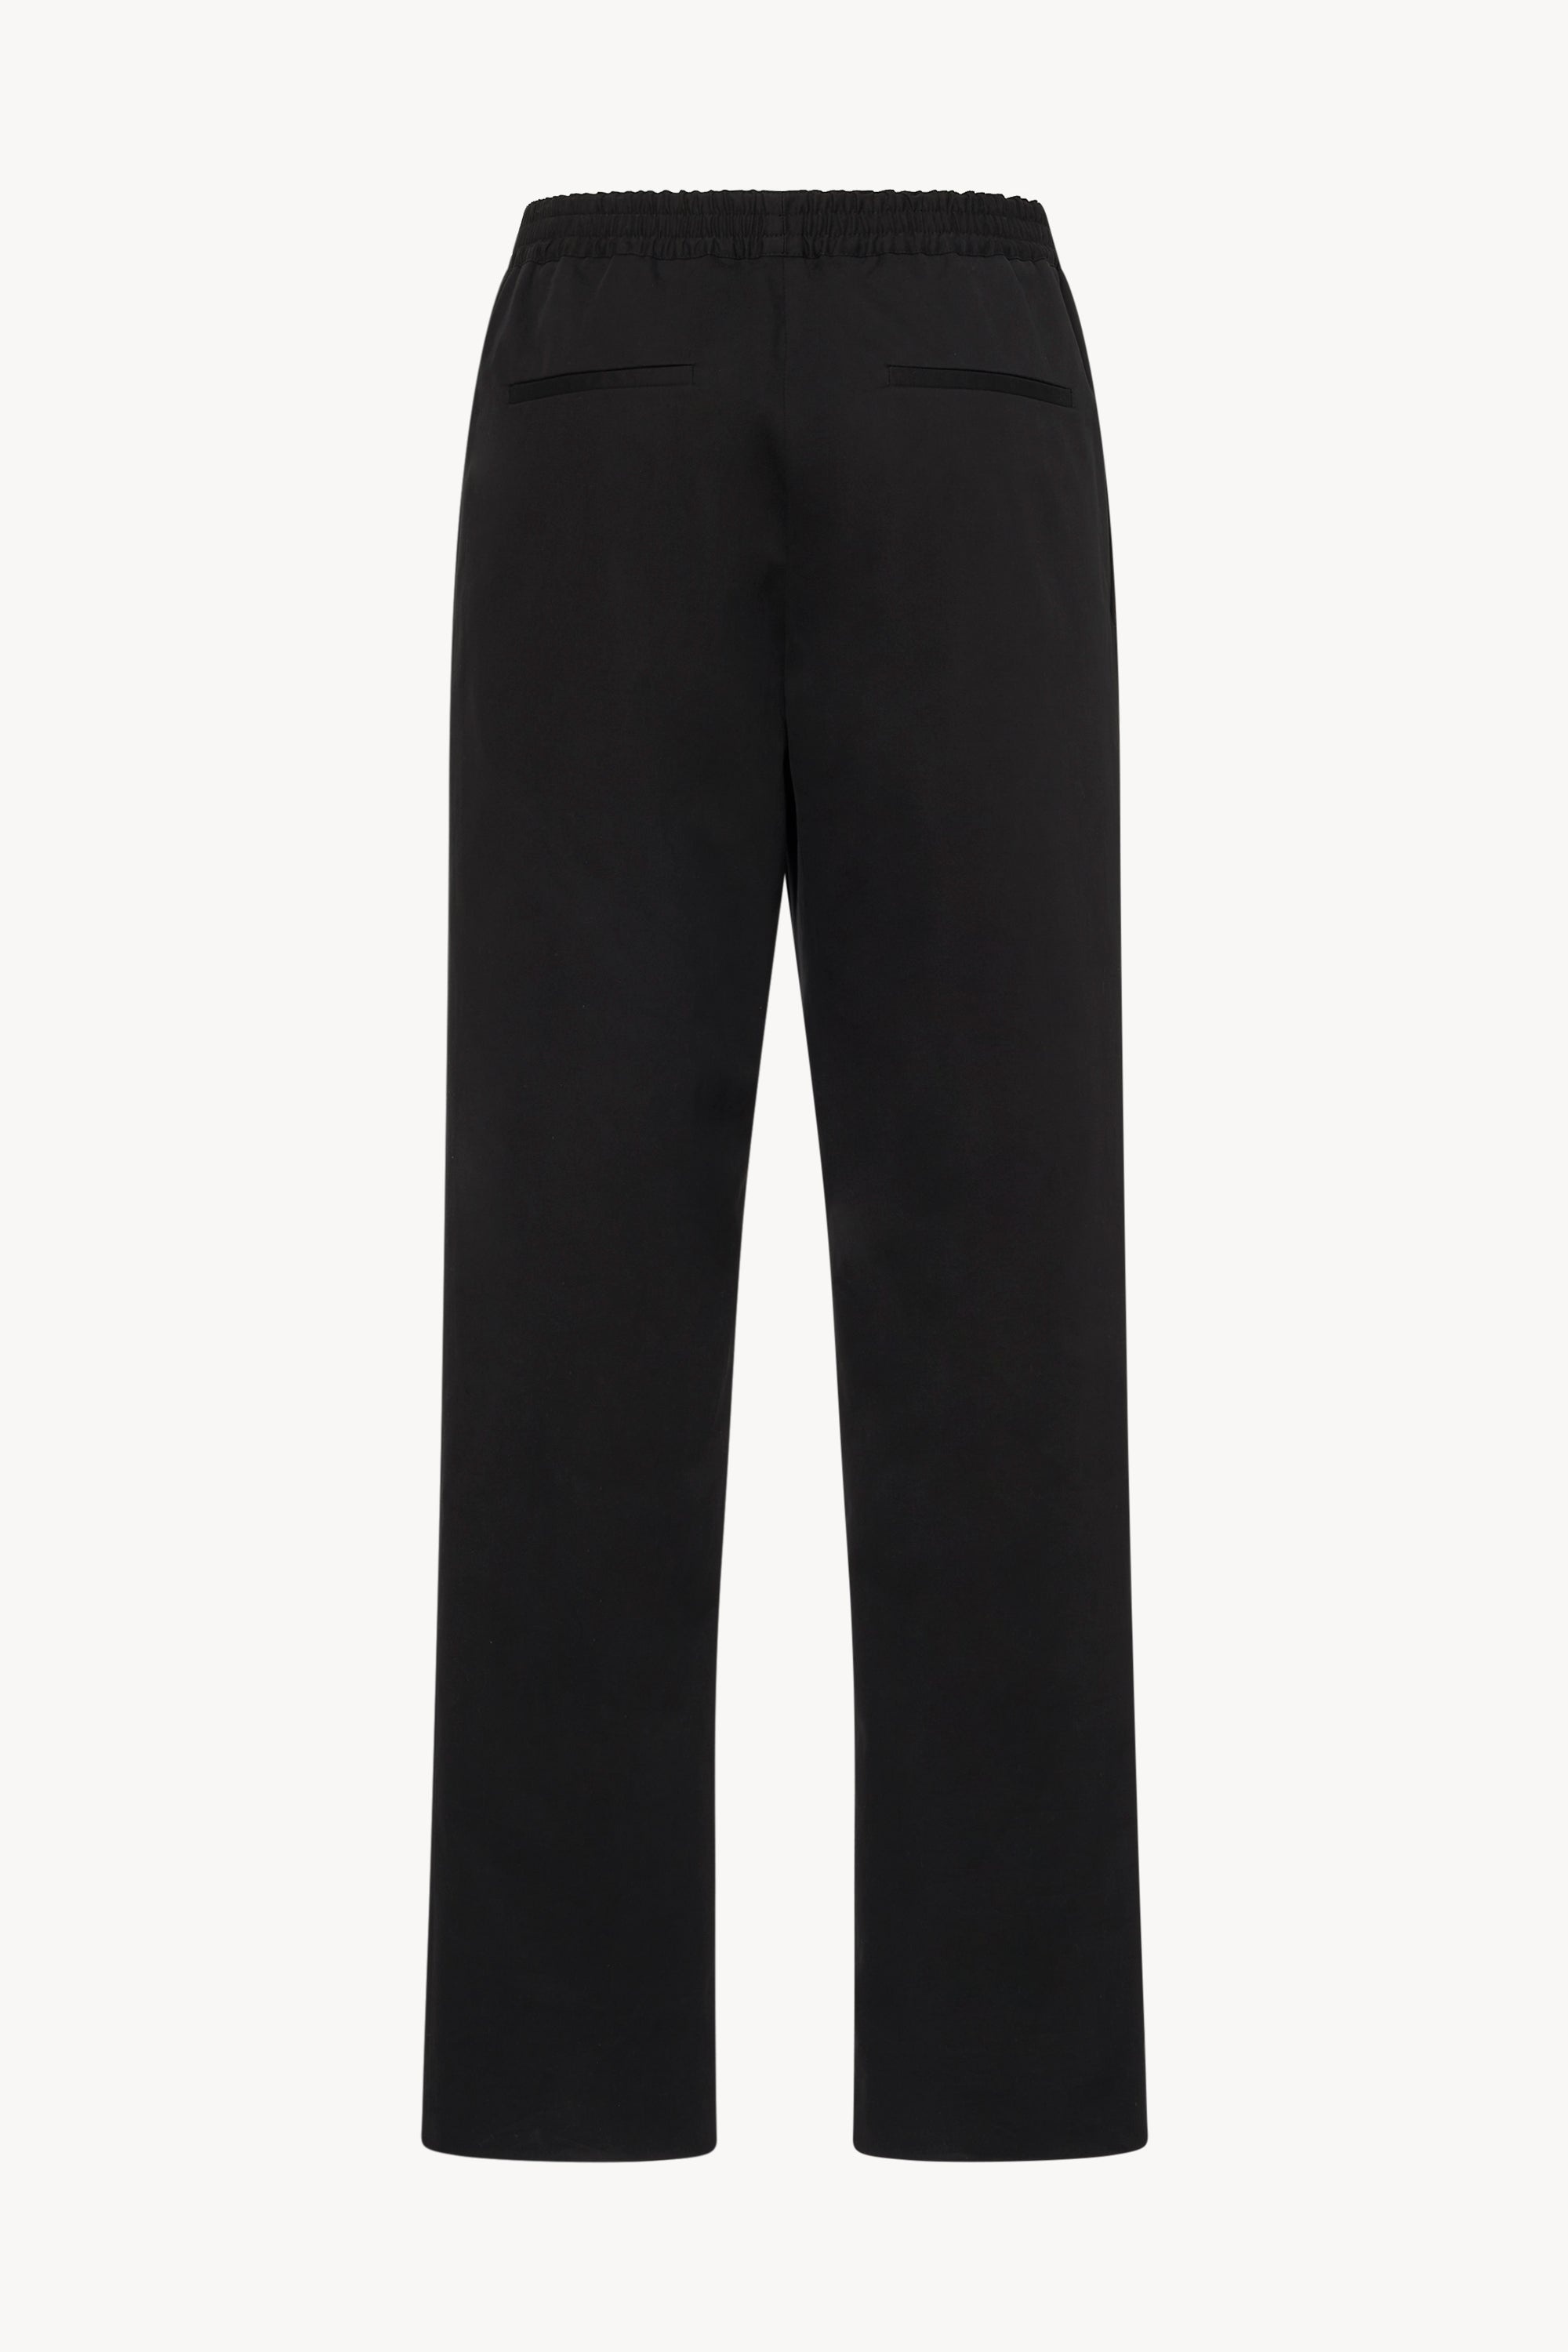 Jonah Pant in Cotton and Cashmere - 2